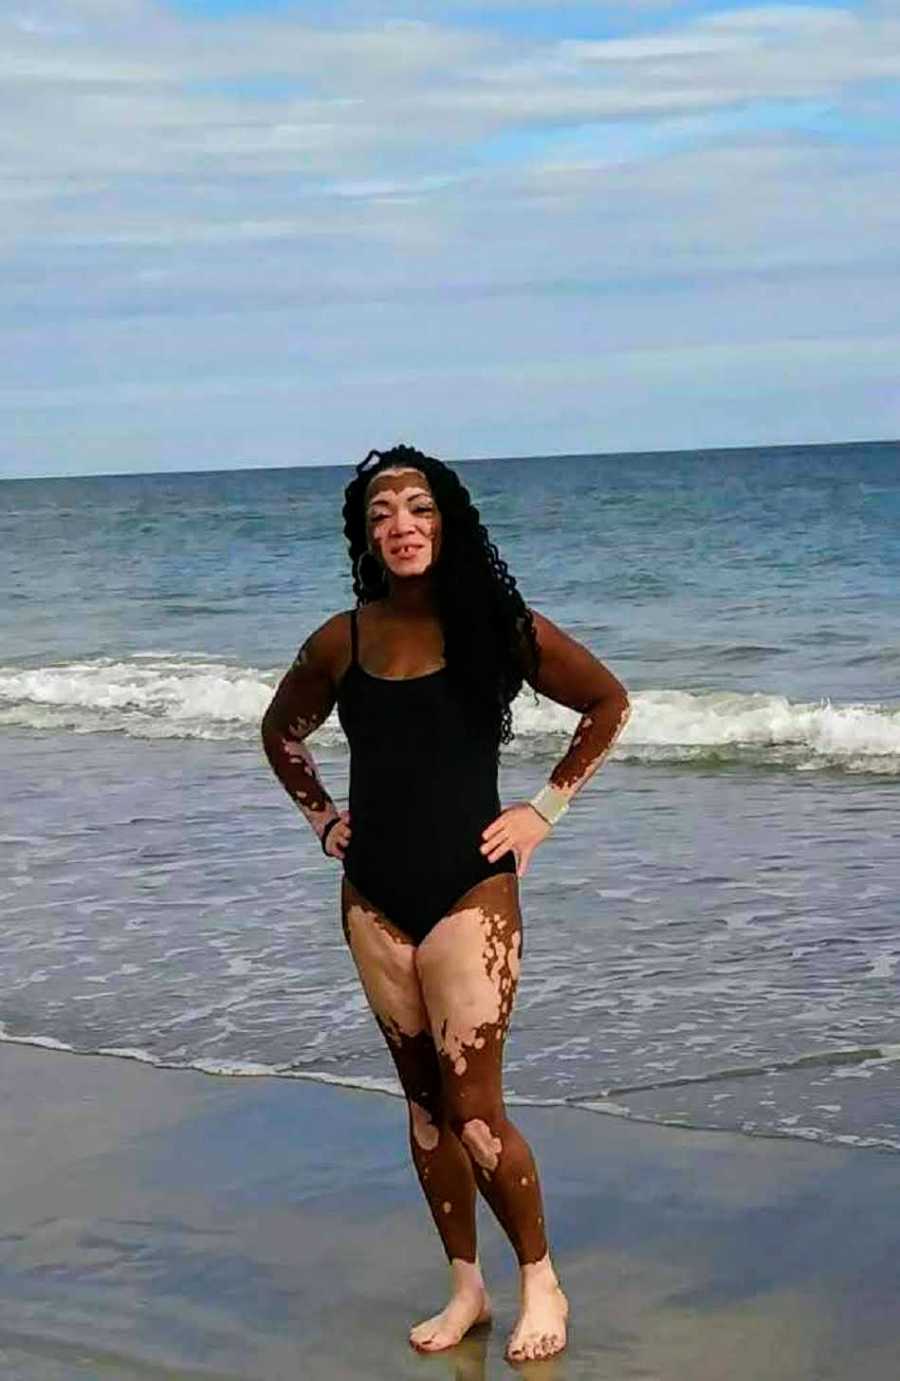 Woman with vitiligo stands on beach in bathing suit with hands on her hips 